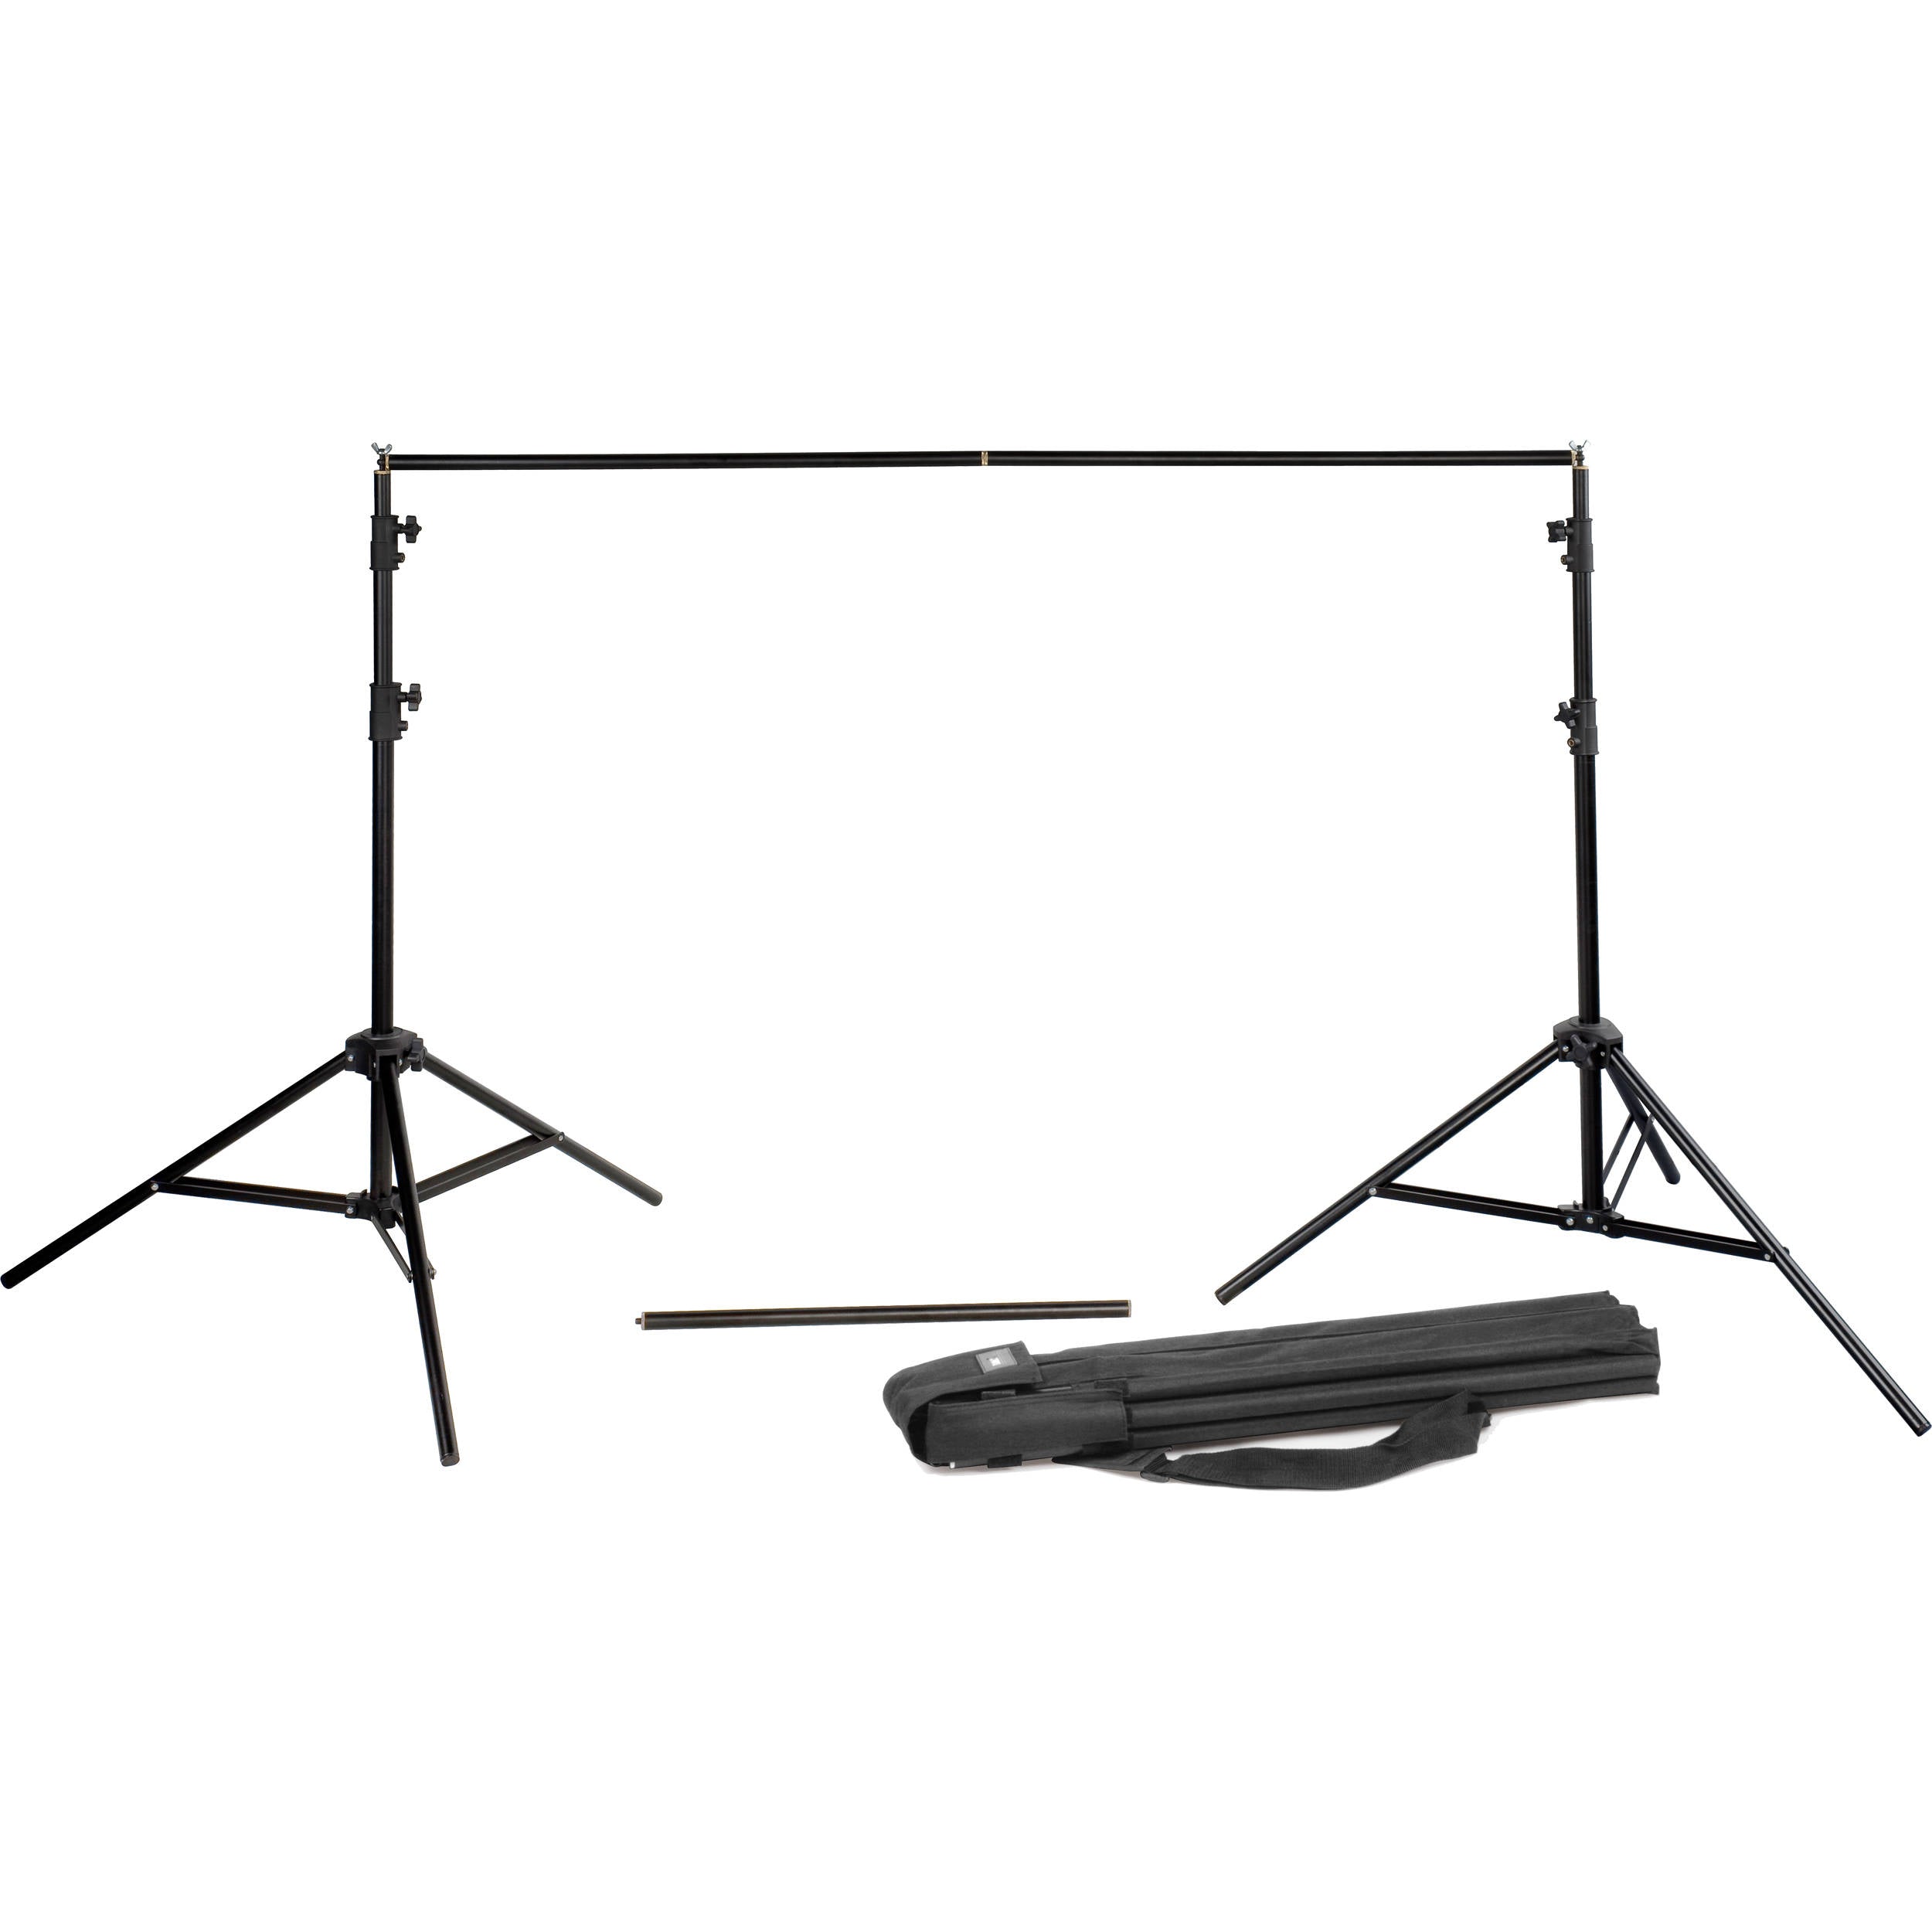 Rental Godox Retractable Backdrop Stand + White Muslin Cloth or PVC Backdrop Rental - R350 P/Day | JHB ONLY Camera tek